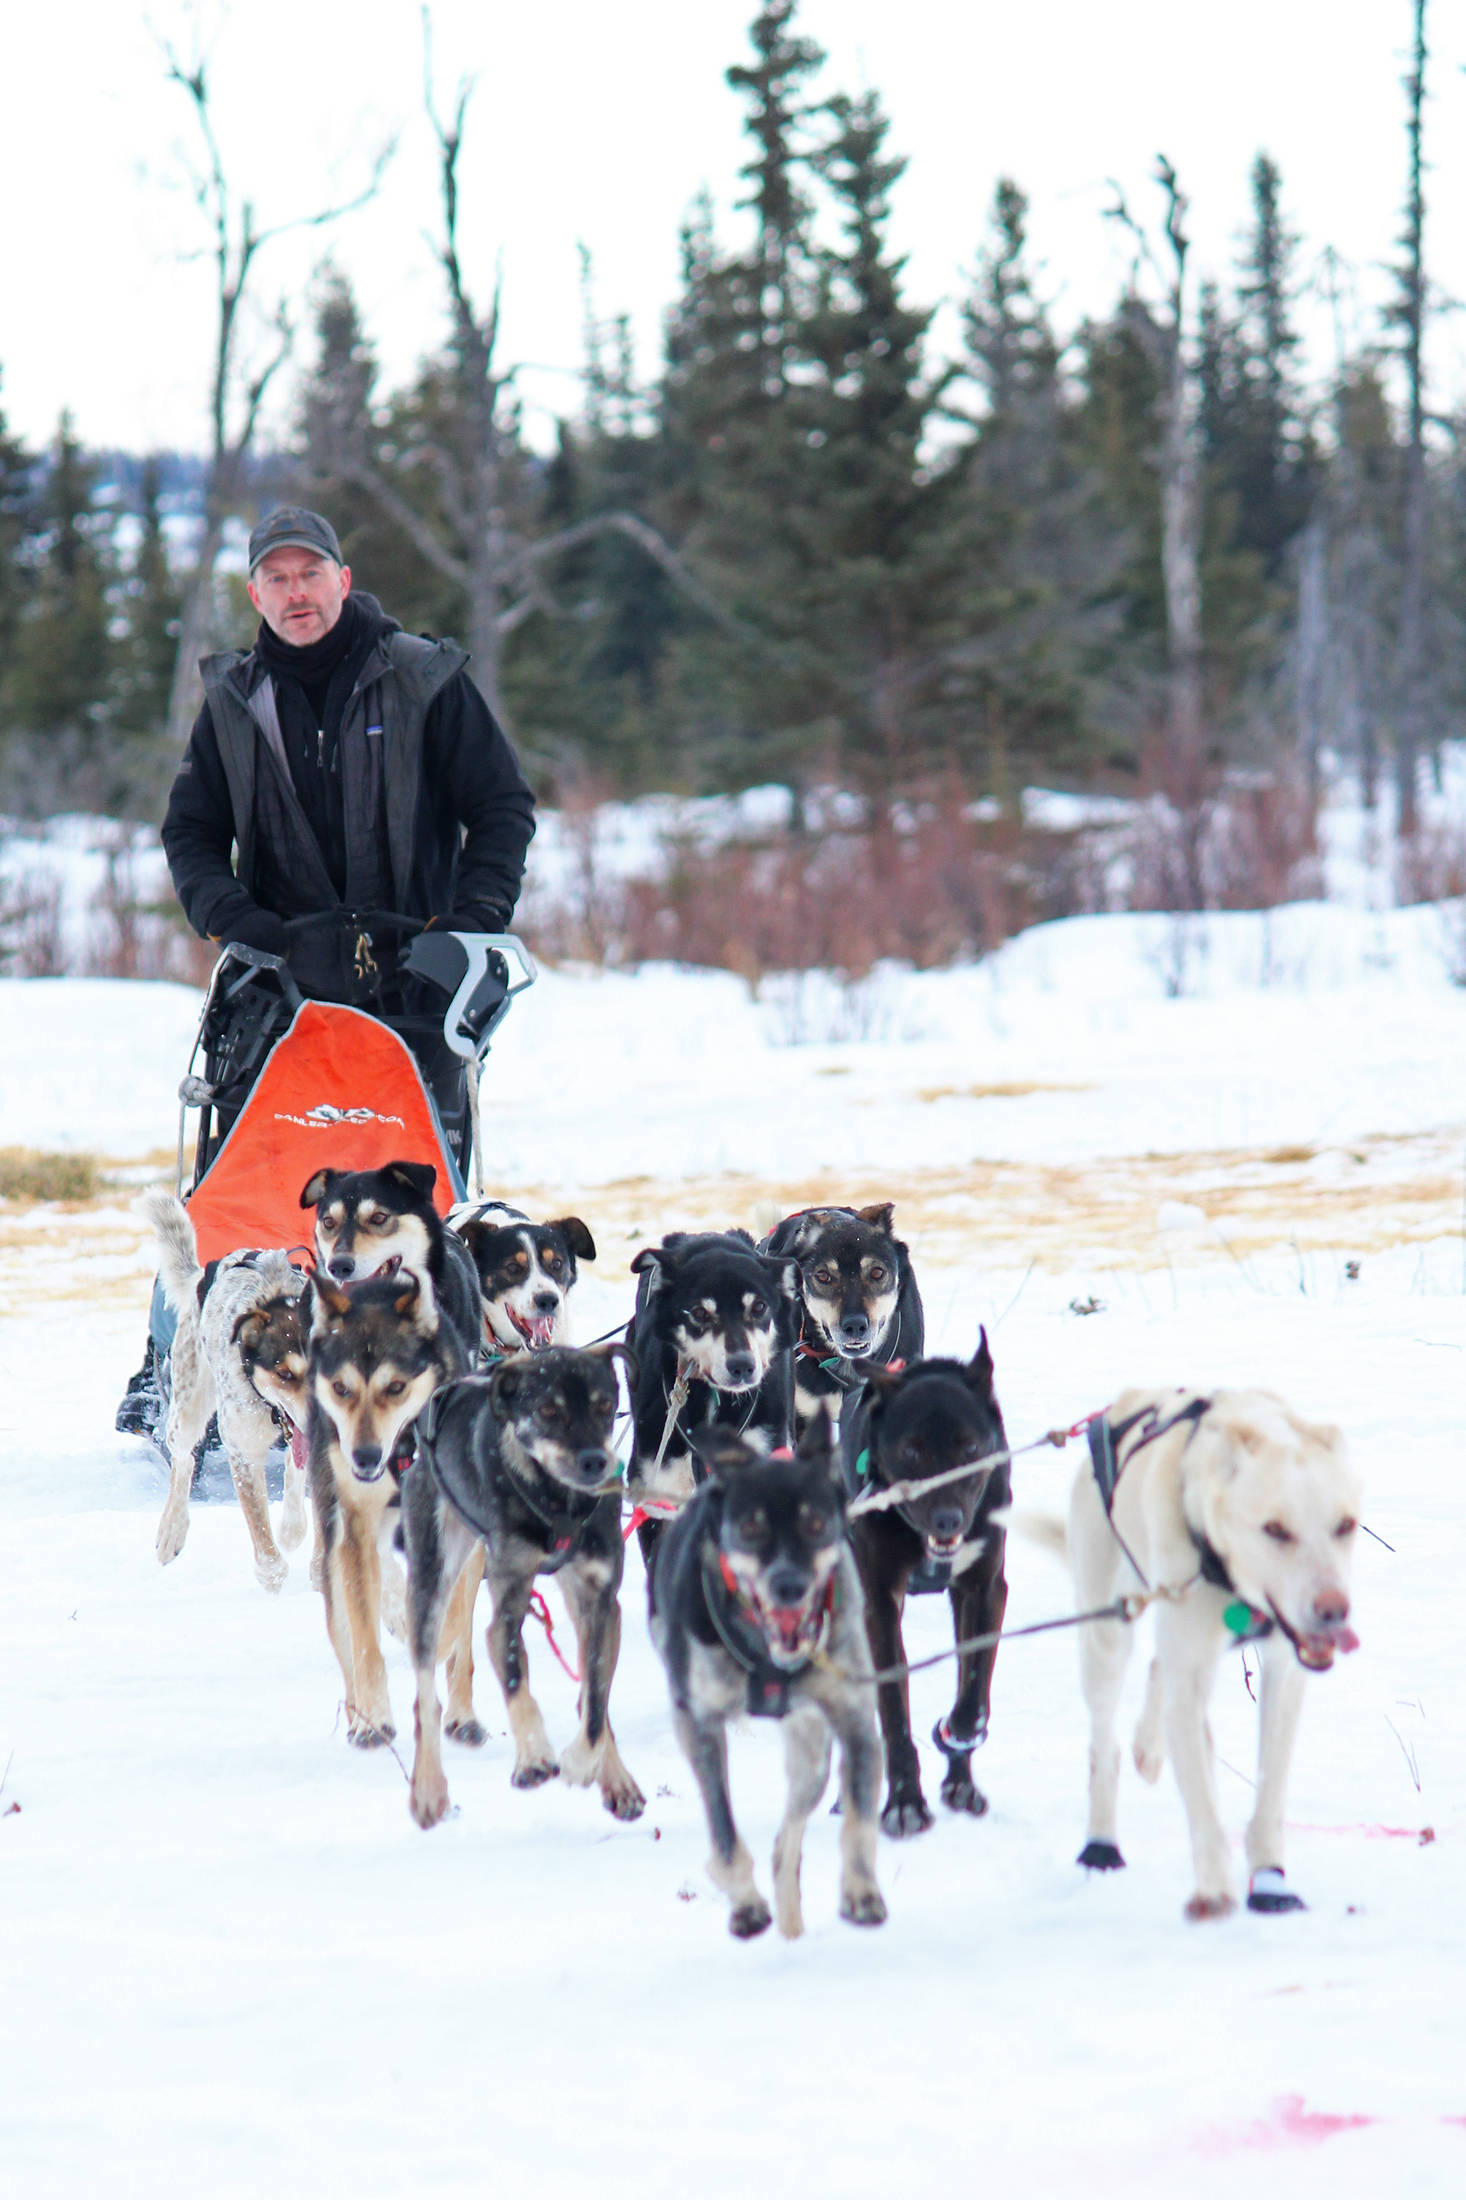 Musher Dave Turner pulls up to the finish line of the Tustumena 200 Sled Dog Race on Sunday, Jan. 27, 2019 at Freddie’s Roadhouse near Ninilchik, Alaska. Turner took first place in the race that takes dog teams throughout the Caribou Hills on the lower Kenai Peninsula. (Photo by Megan Pacer/Homer News)